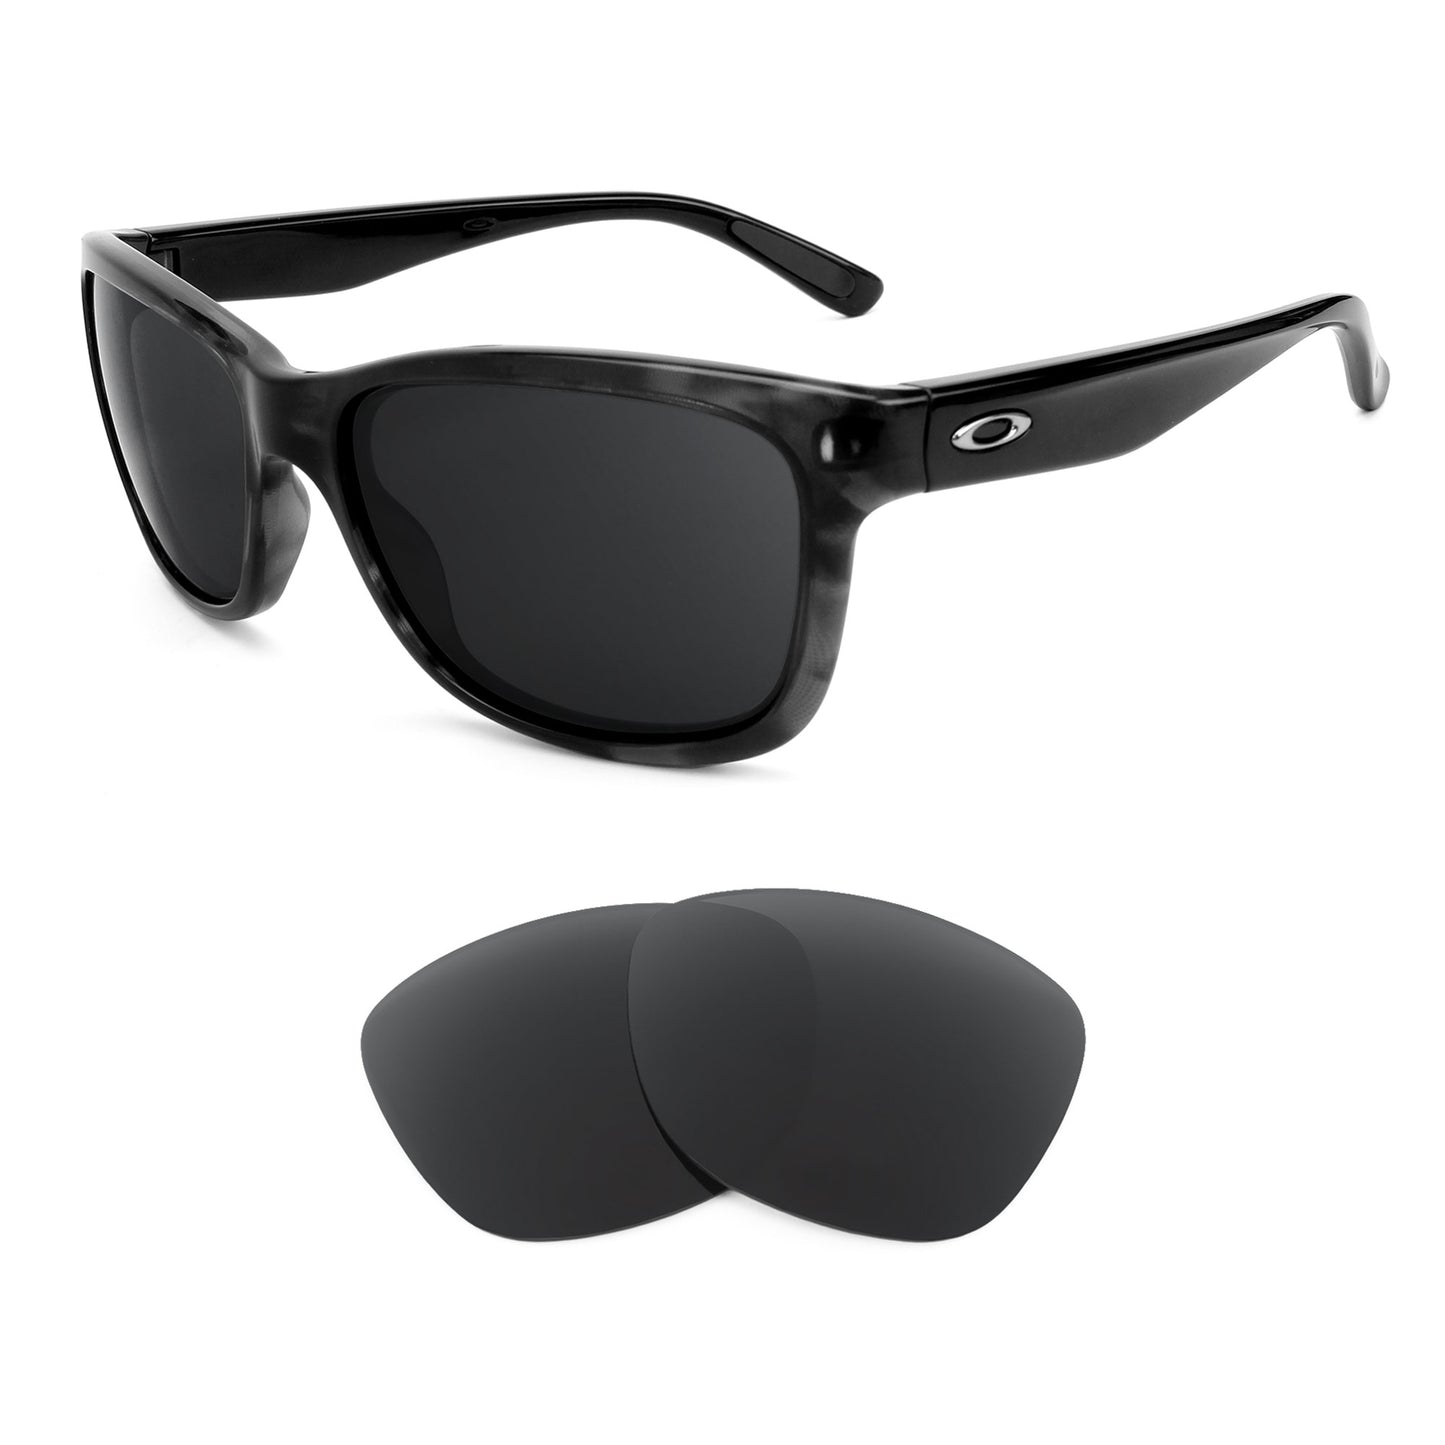 Oakley Forehand sunglasses with replacement lenses